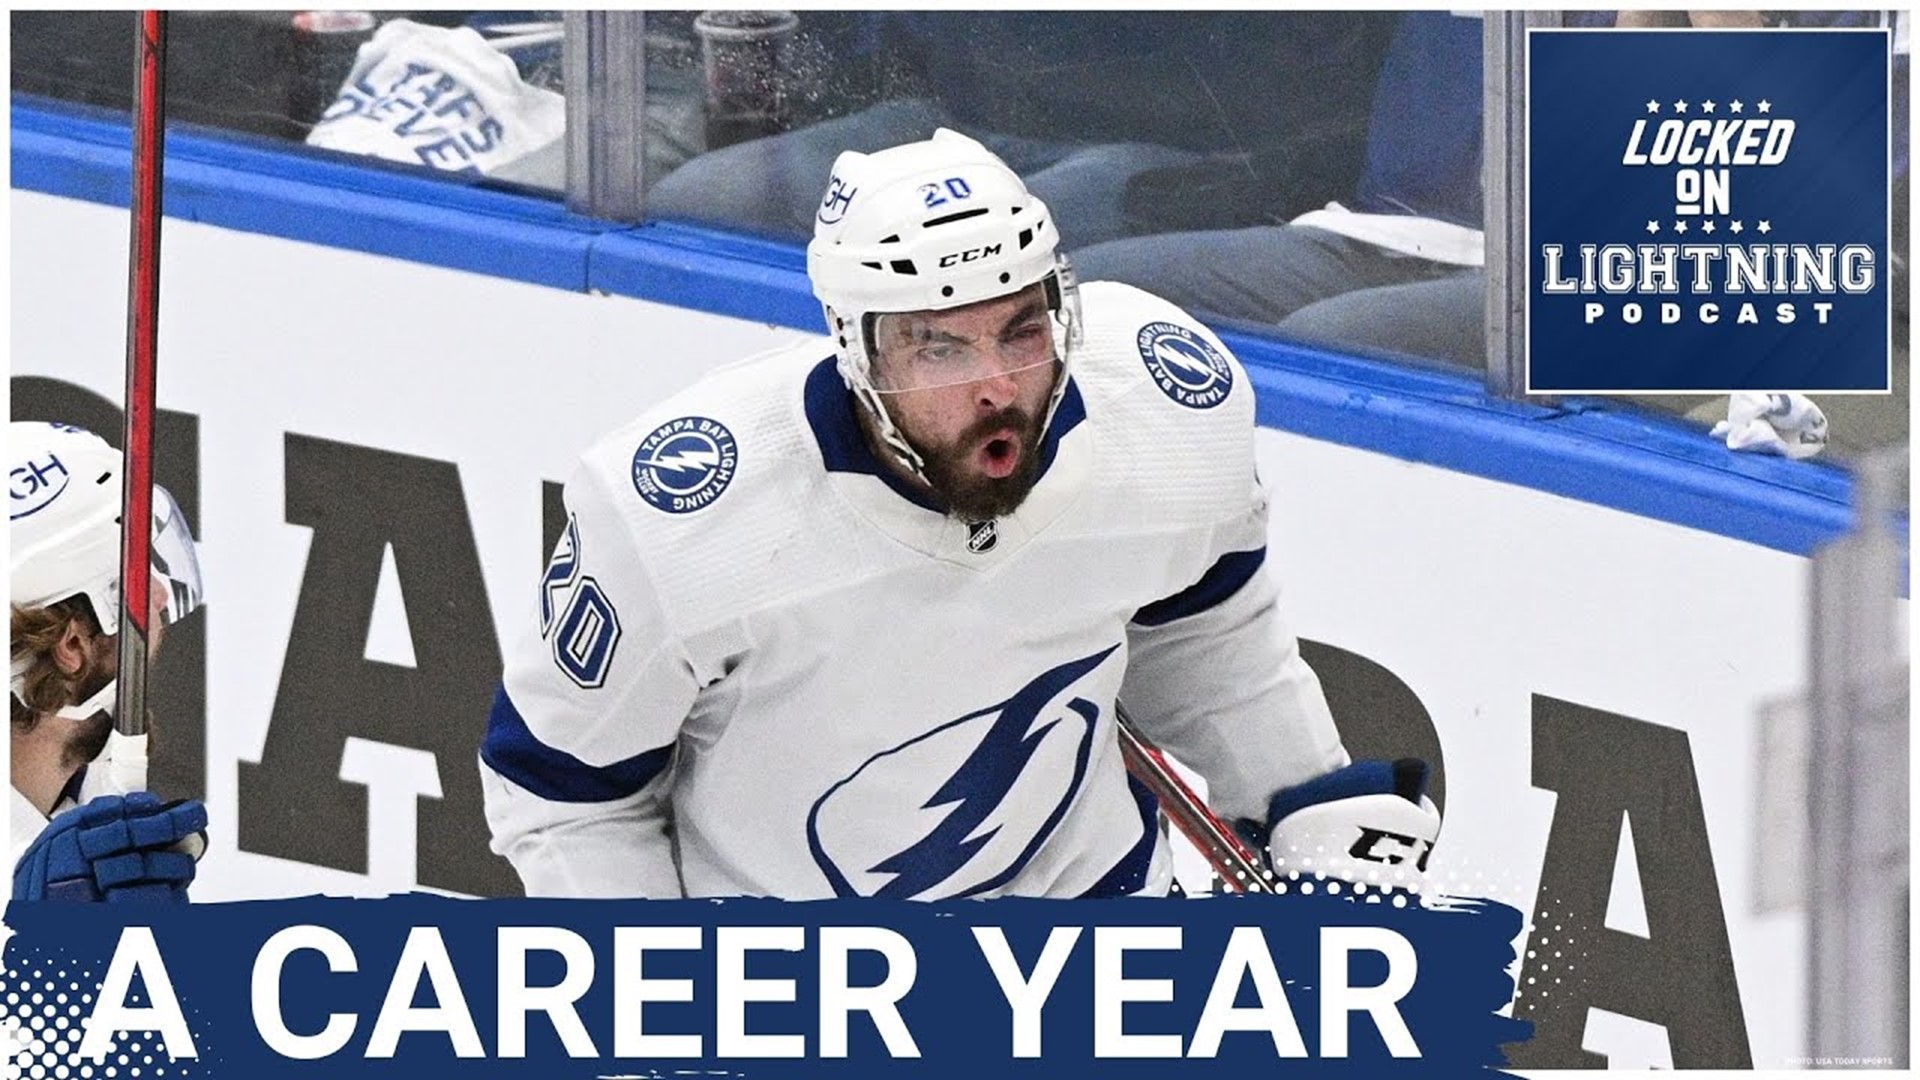 On today's episode we discuss Nick Paul being this year's most surprising performance. Paul had career-highs in games played, goals, and points